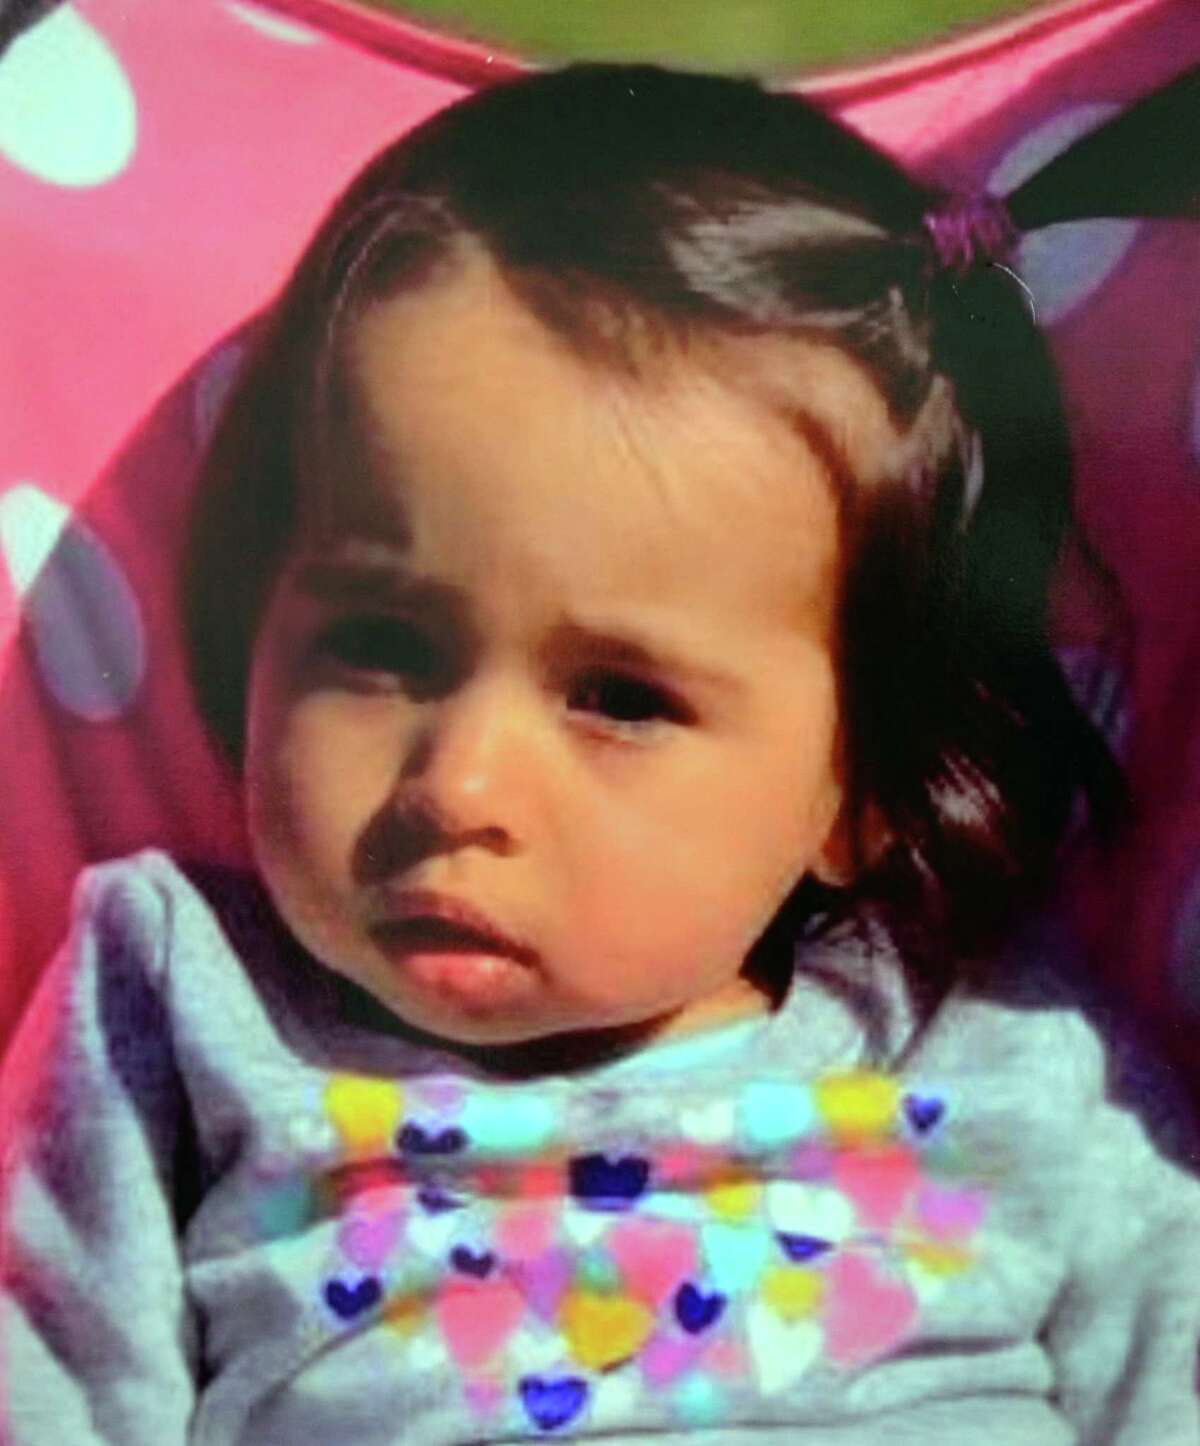 A photo of missing one-year-old Vanessa Morales is released by the Ansonia Police Department during a press conference held at Ansonia City Hall in Ansonia, Conn., on Tuesday Dec. 3, 2019. Morales is missing after the body of a woman police believe is the mother was found deceased at a home on Myrtle Avenue.